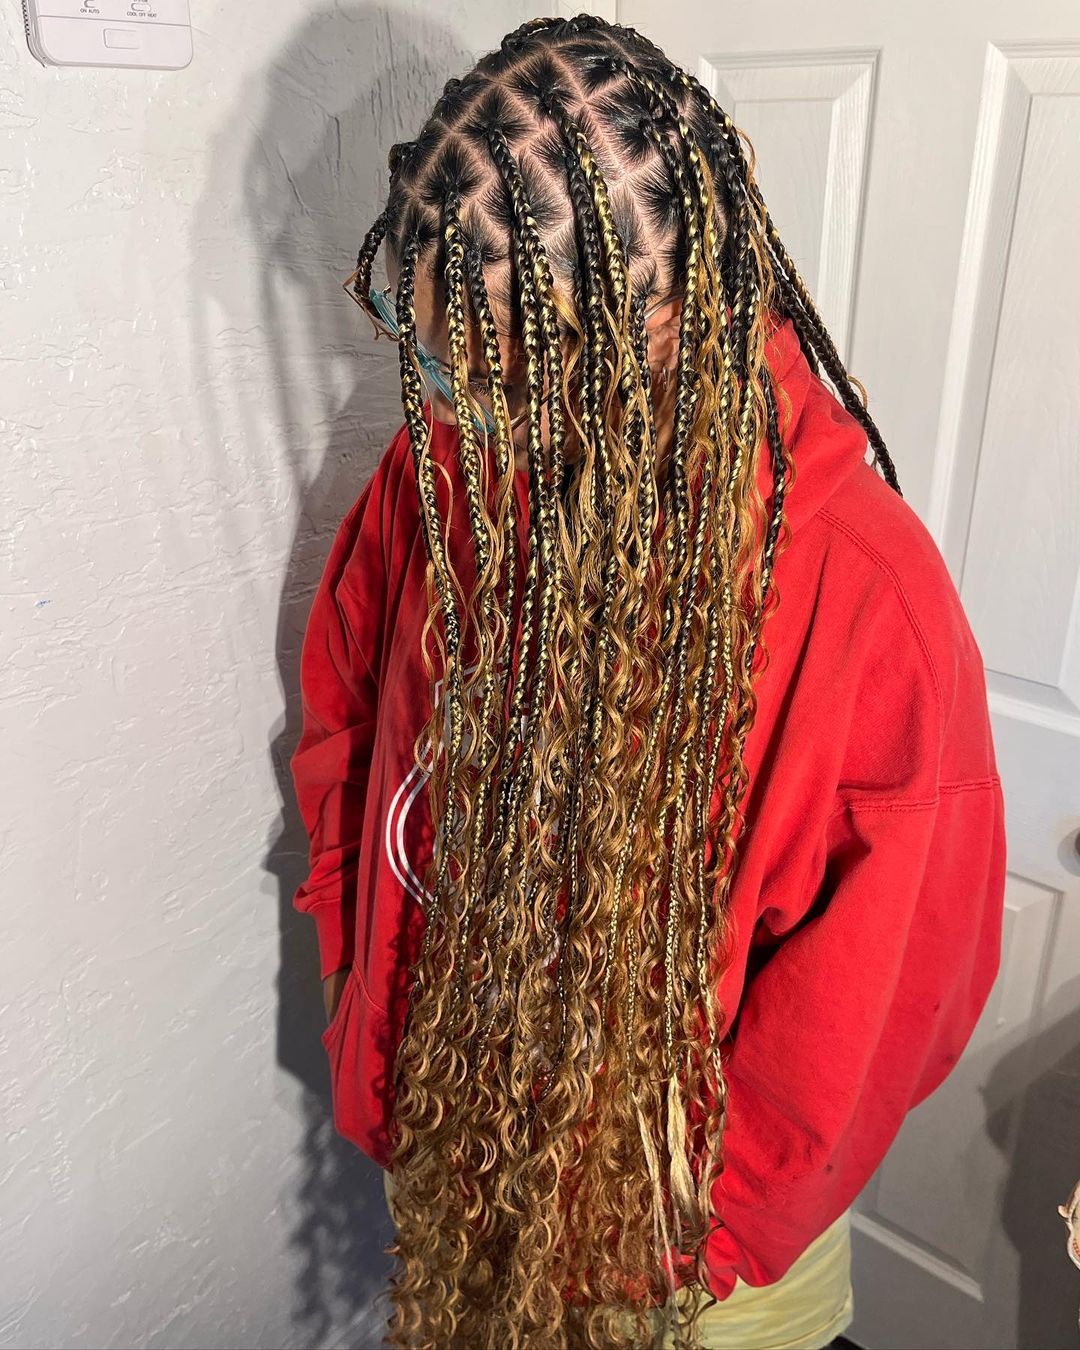 33. Curly Black and Gold Bohemian Knotless Braids